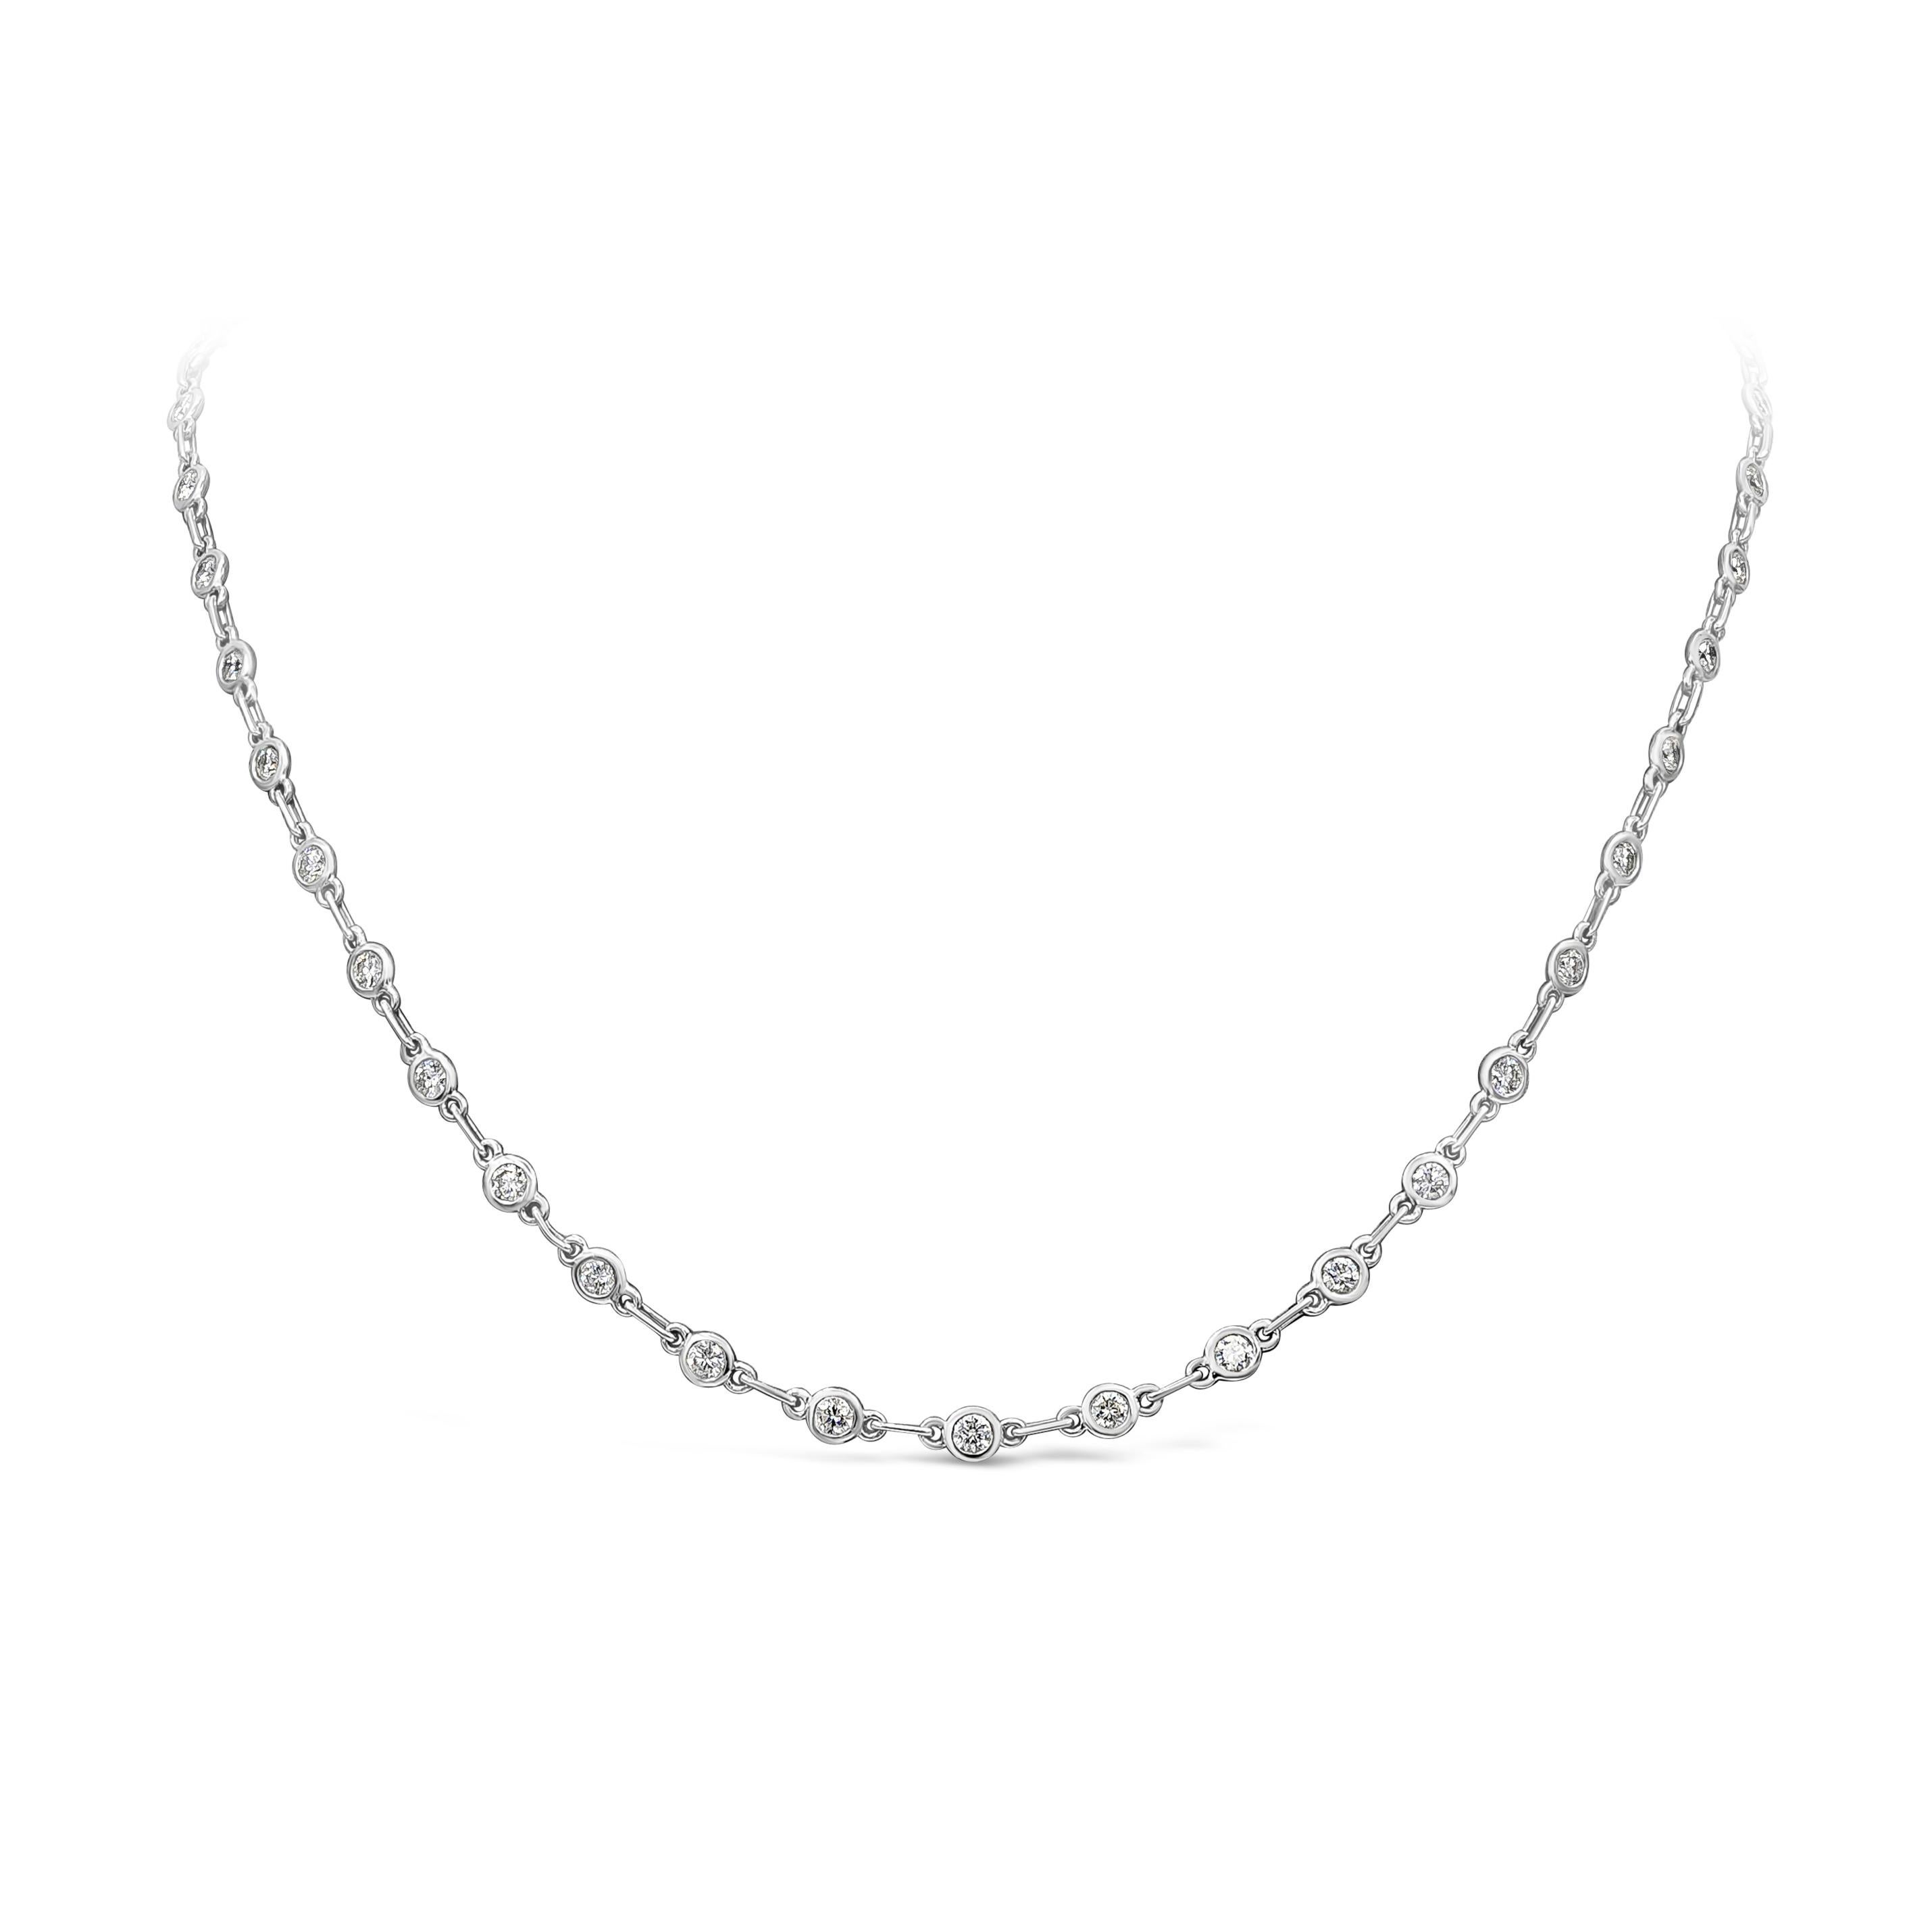 Contemporary Roman Malakov 3.39 Carats Total Brilliant Round Diamond by The Yard Necklace For Sale